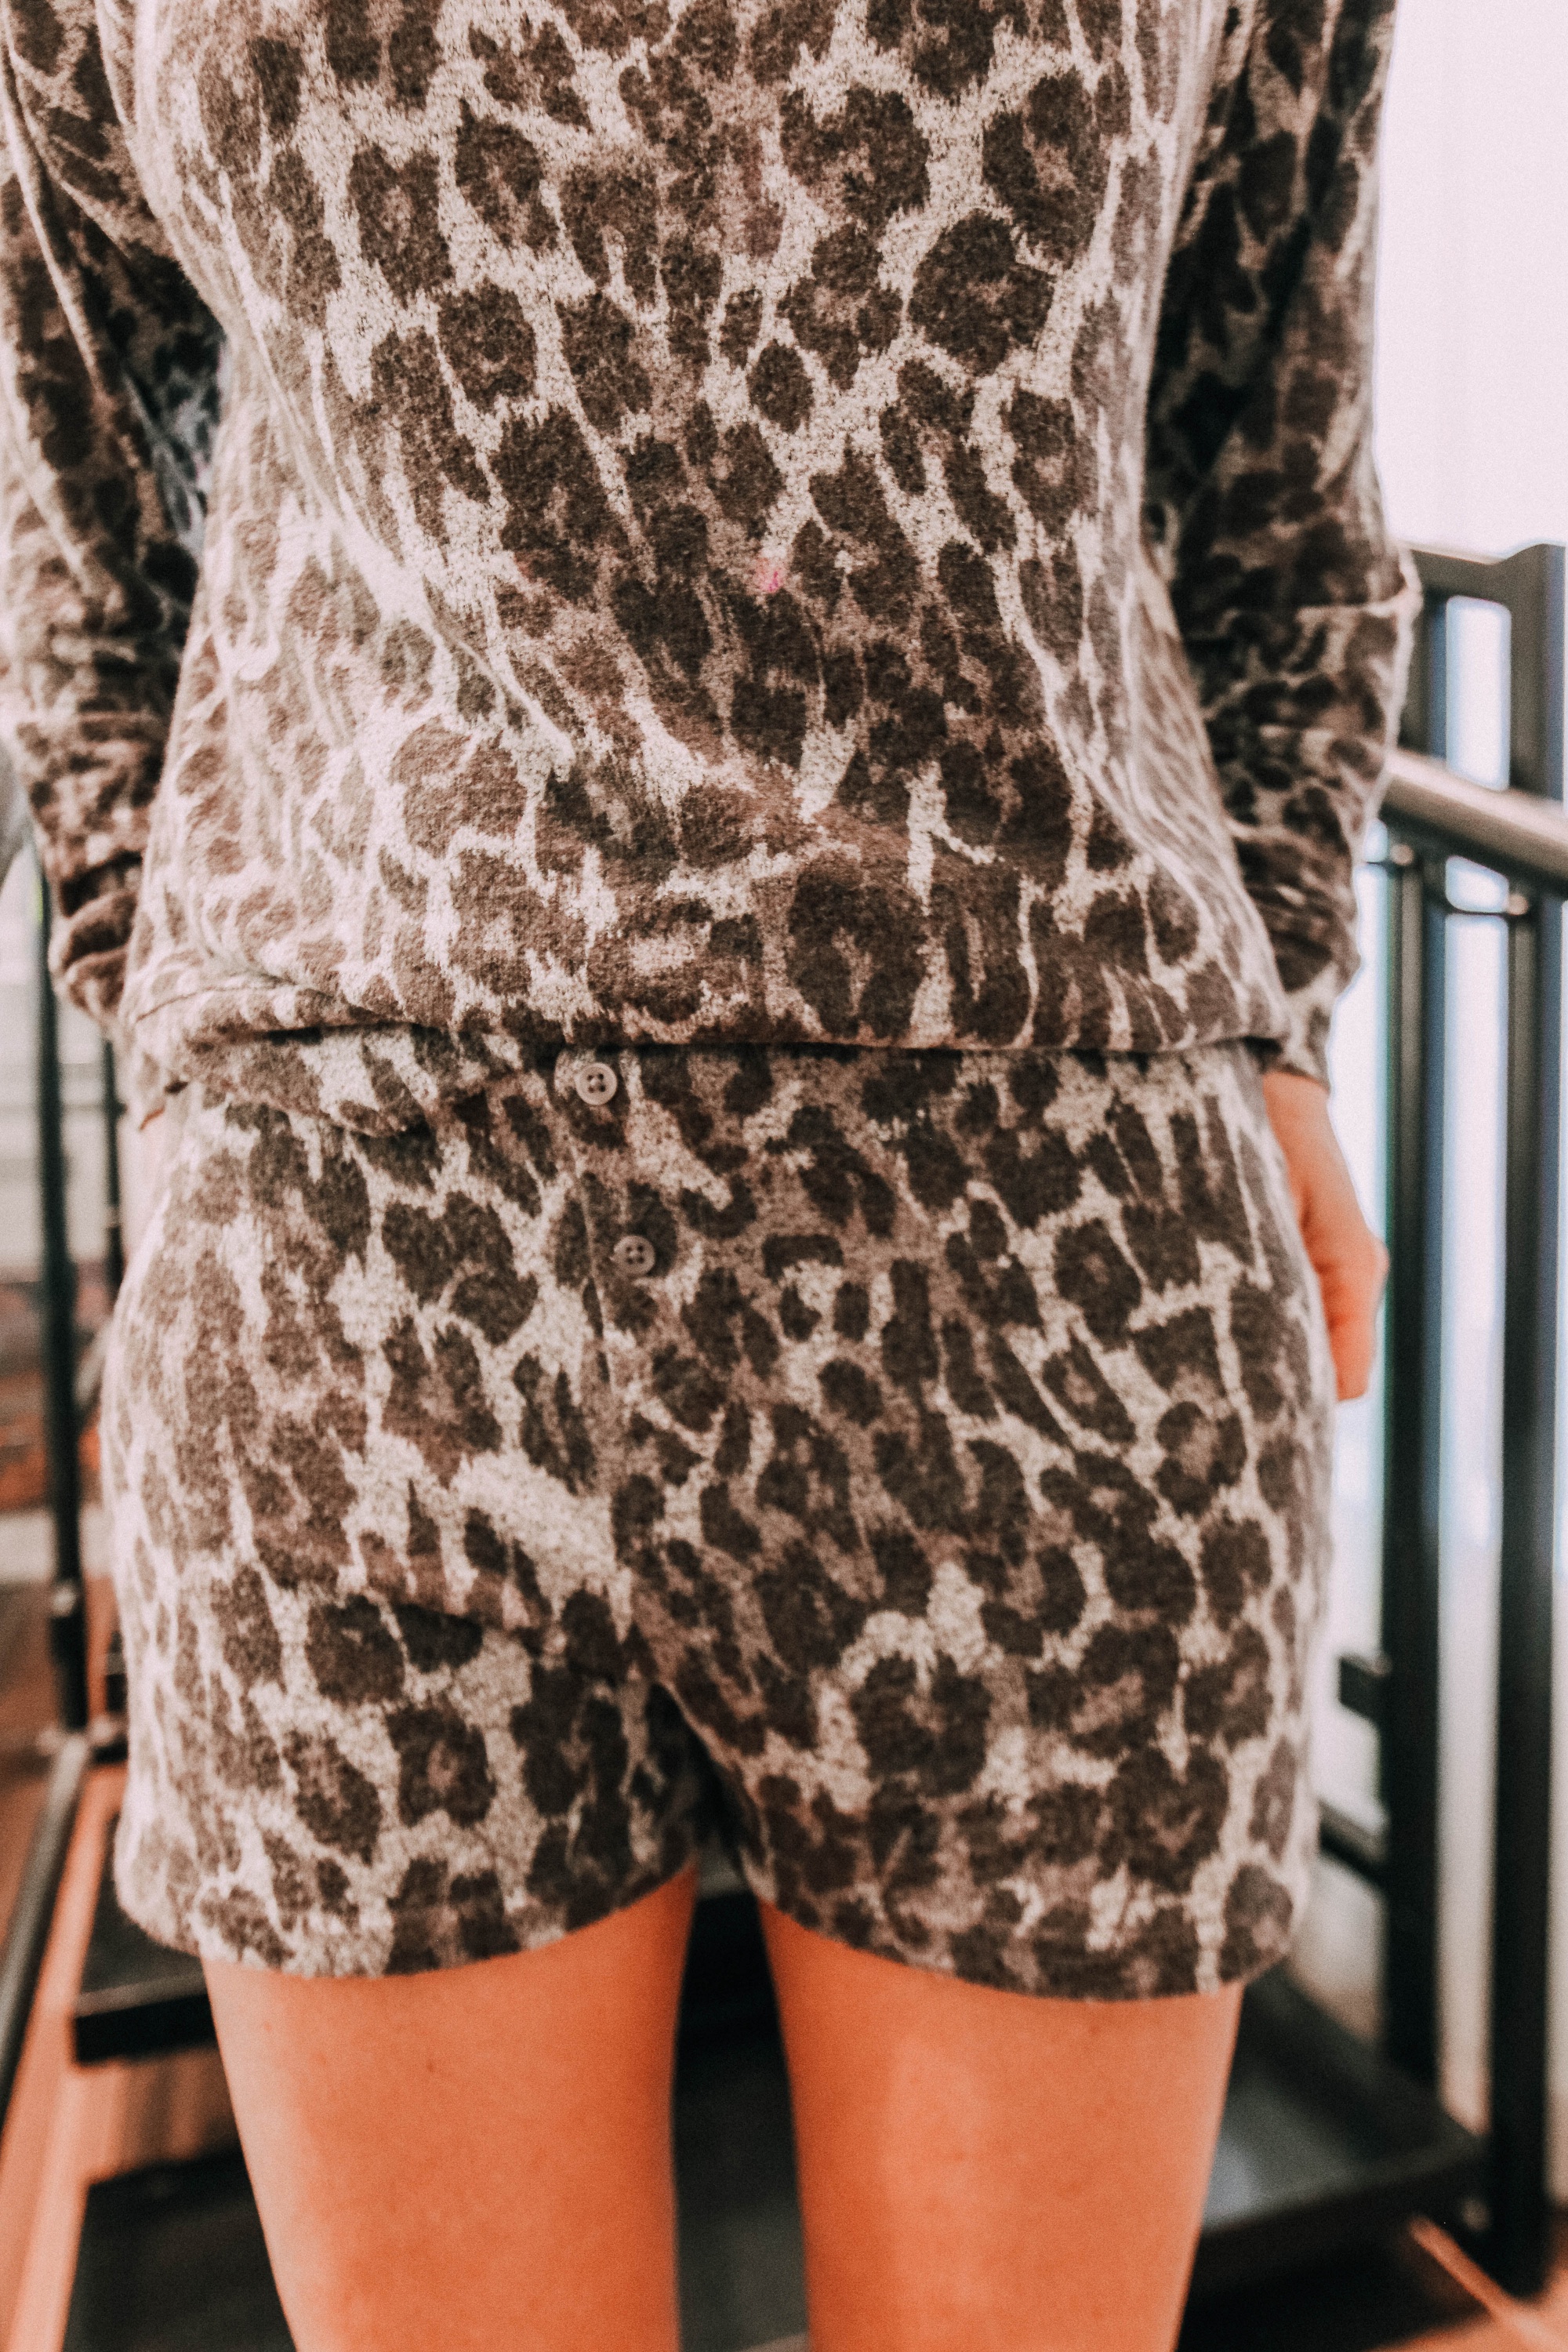 Leopard Print, Fashion blogger Erin Busbee of BusbeeStyle.com sharing the coziest loungewear from the NSale including leopard print pajamas